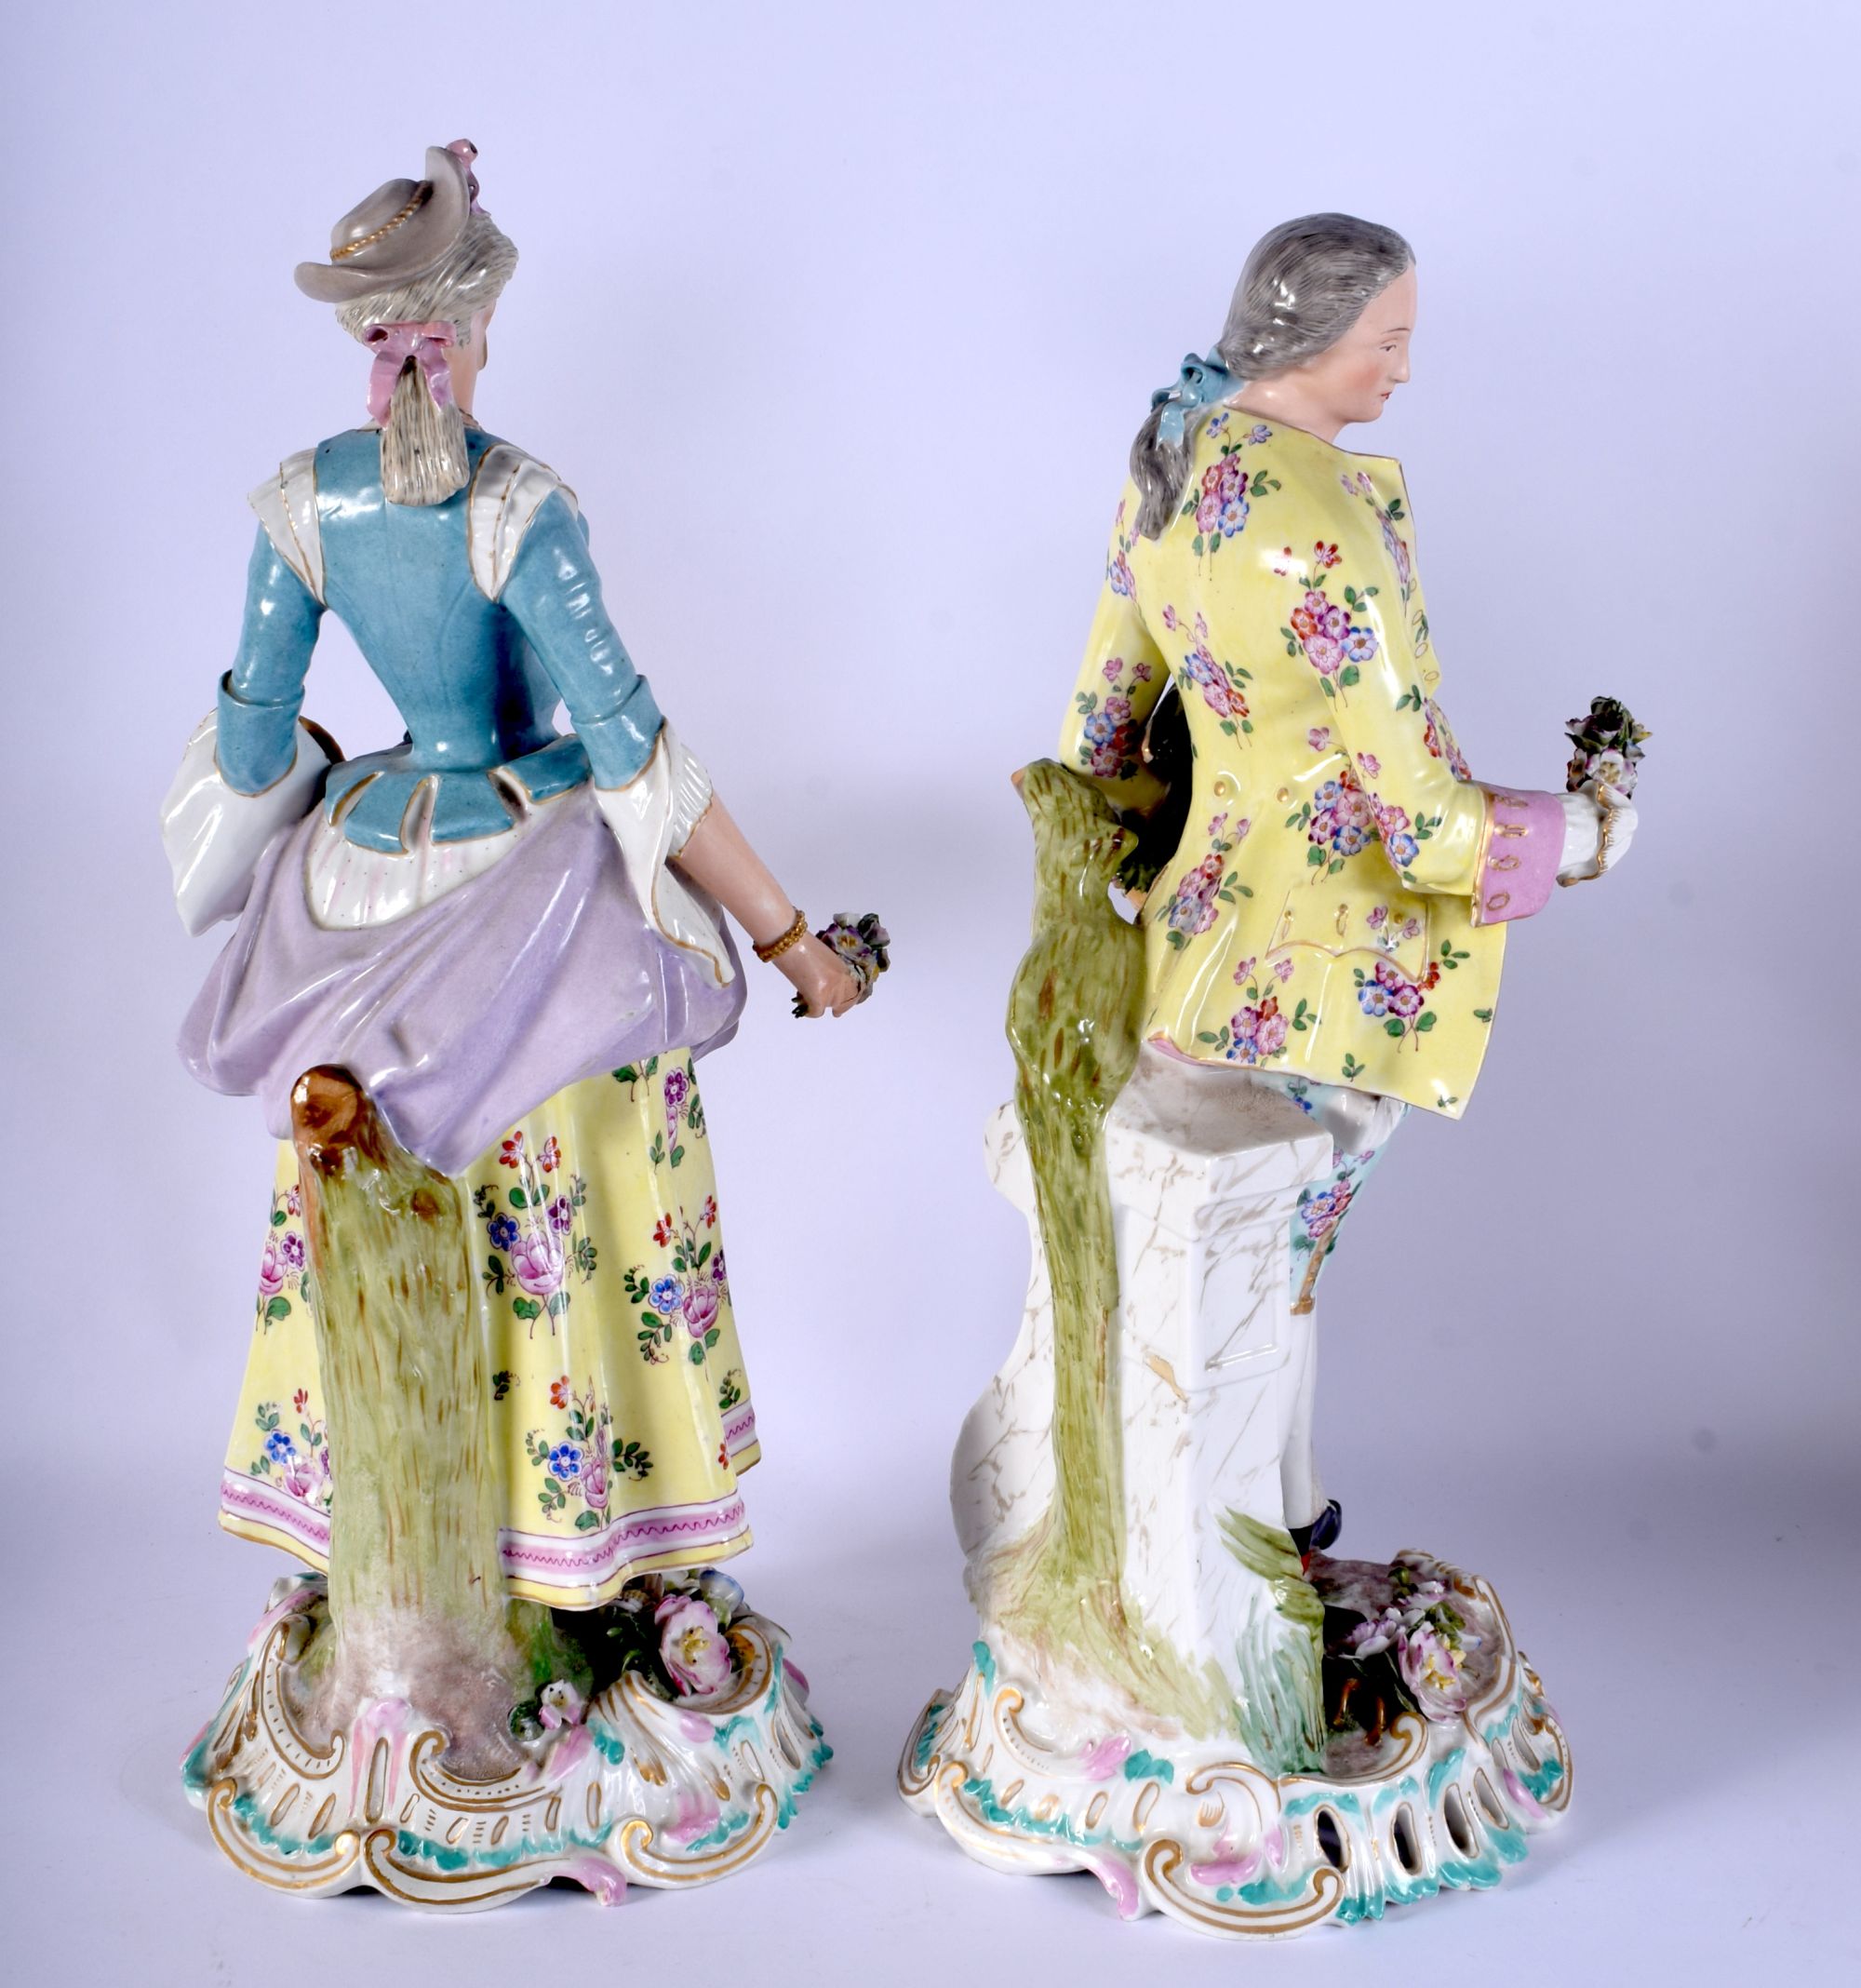 A LARGE PAIR OF LATE 19TH CENTURY GERMAN DRESDEN PORCELAIN FIGURES Meissen style. 42 cm high. - Image 3 of 9